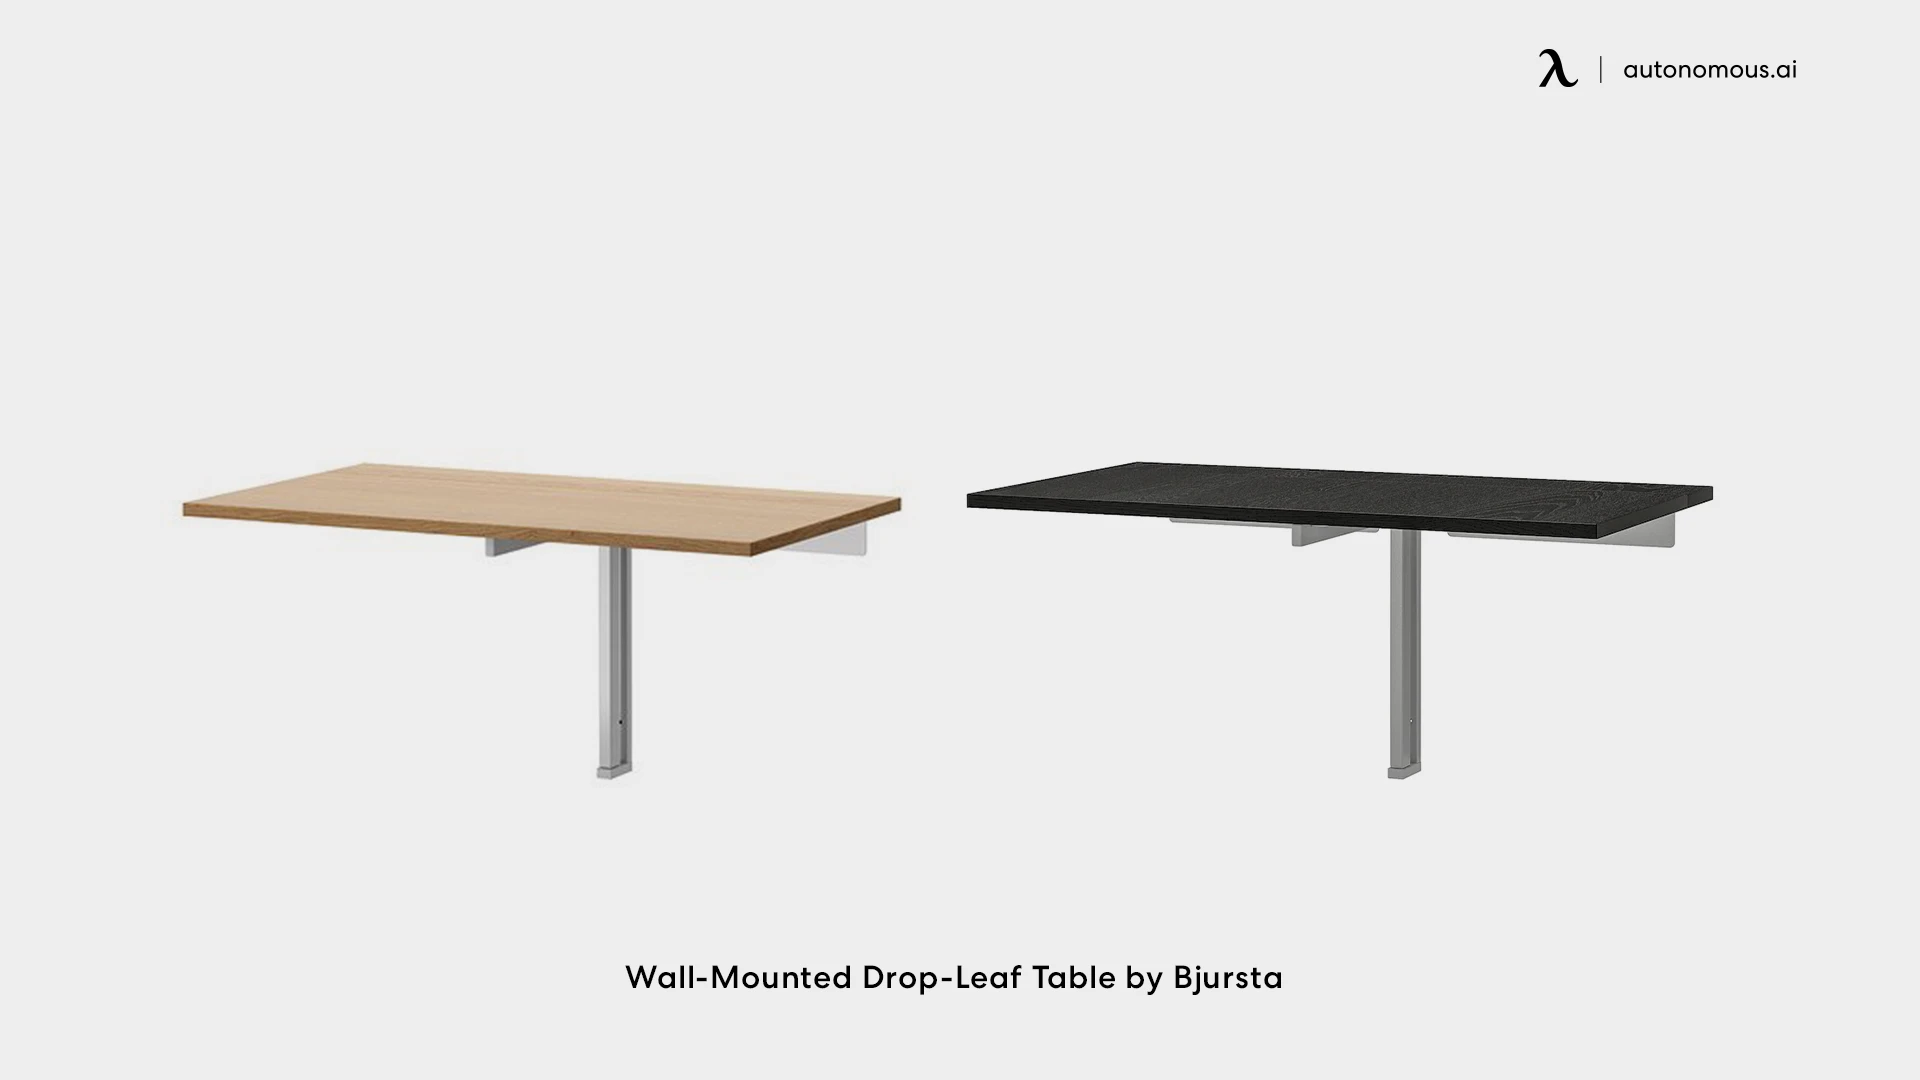 Wall-Mounted Drop-Leaf Table by Bjursta